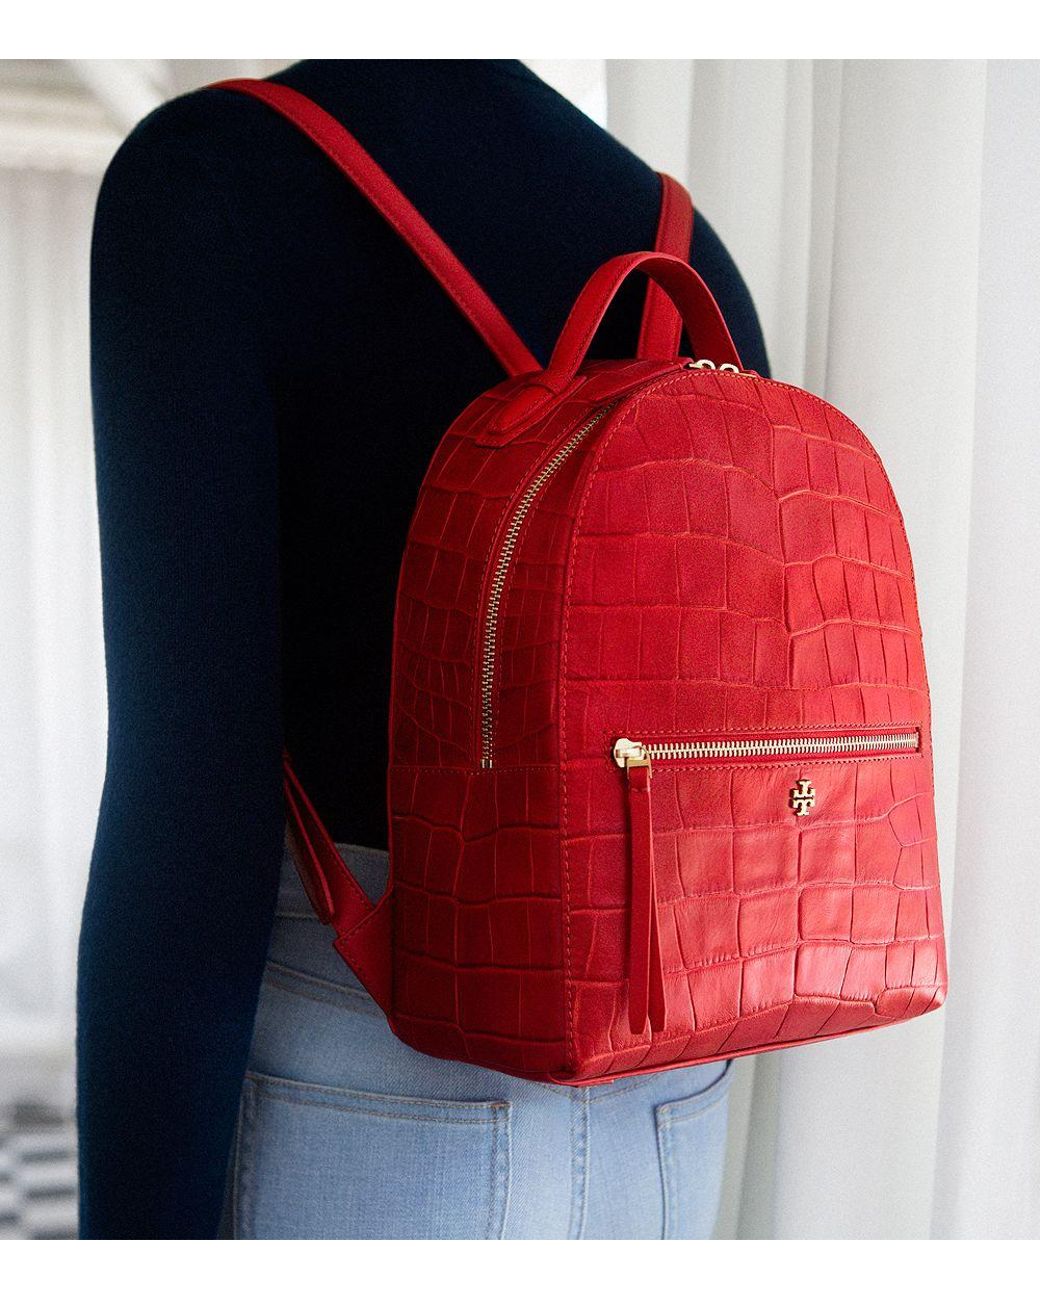 Tory Burch Croc-embossed Mini Backpack in Red | Lyst